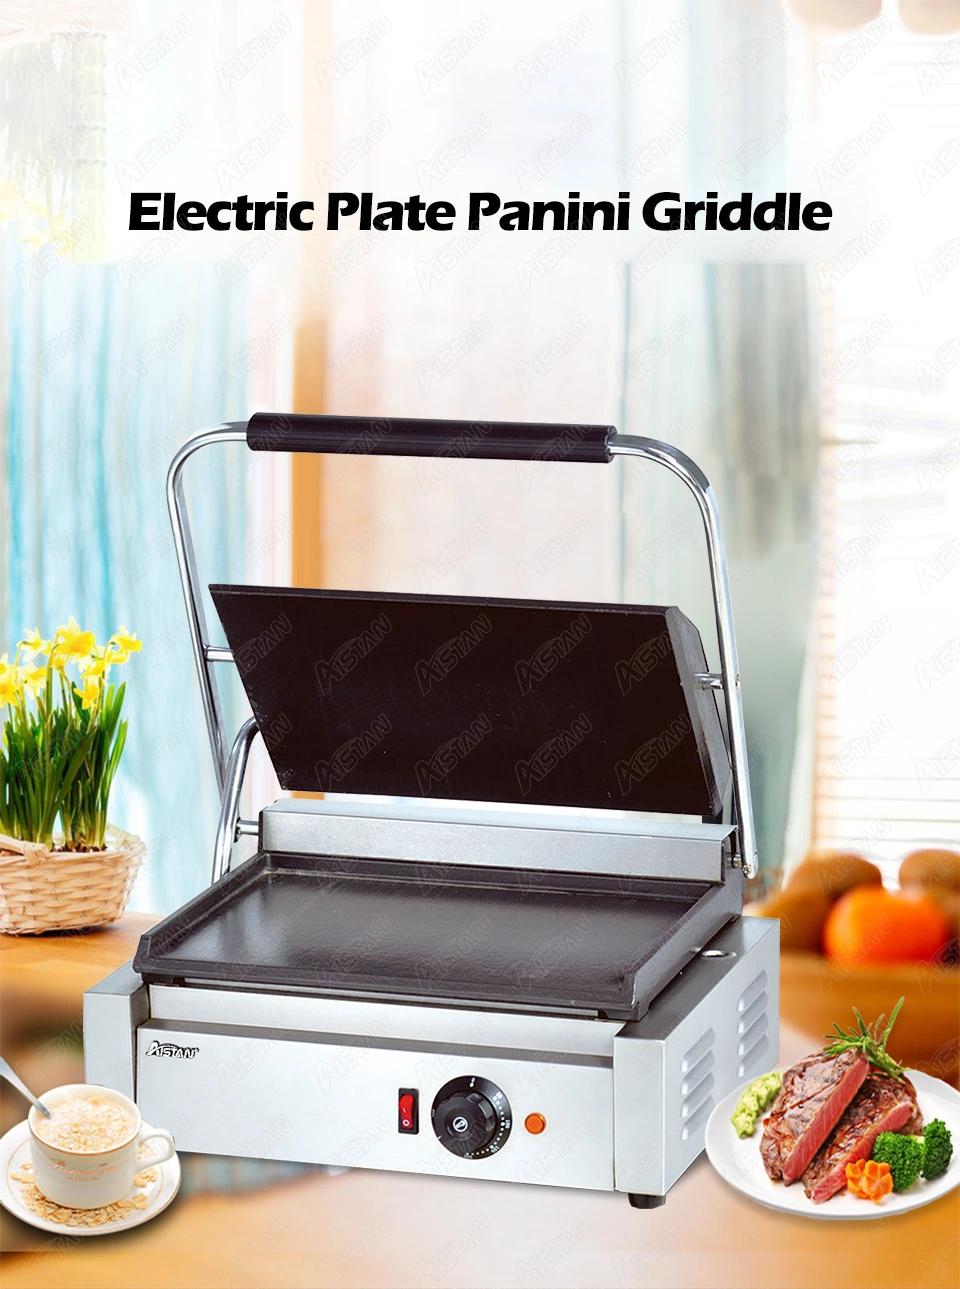 Eg811 Electric Panini Press Grill, Sandwich Maker with Temperature Control, Toaster with Nonstick Easy Clean Grooved Plates